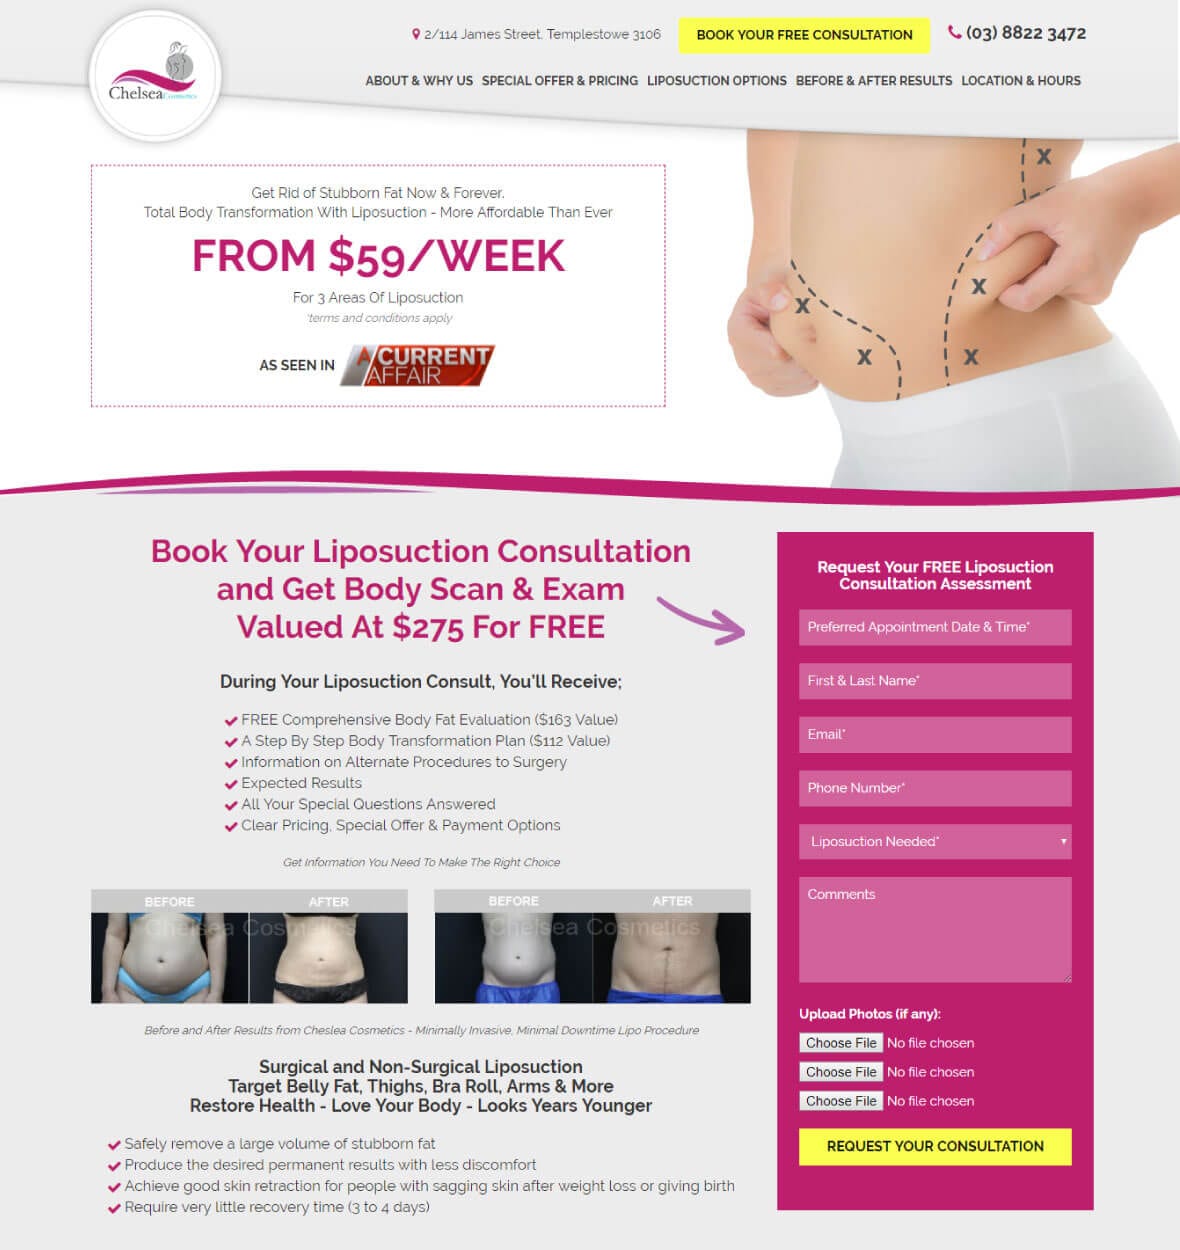 Dedicated landing page for liposuction services